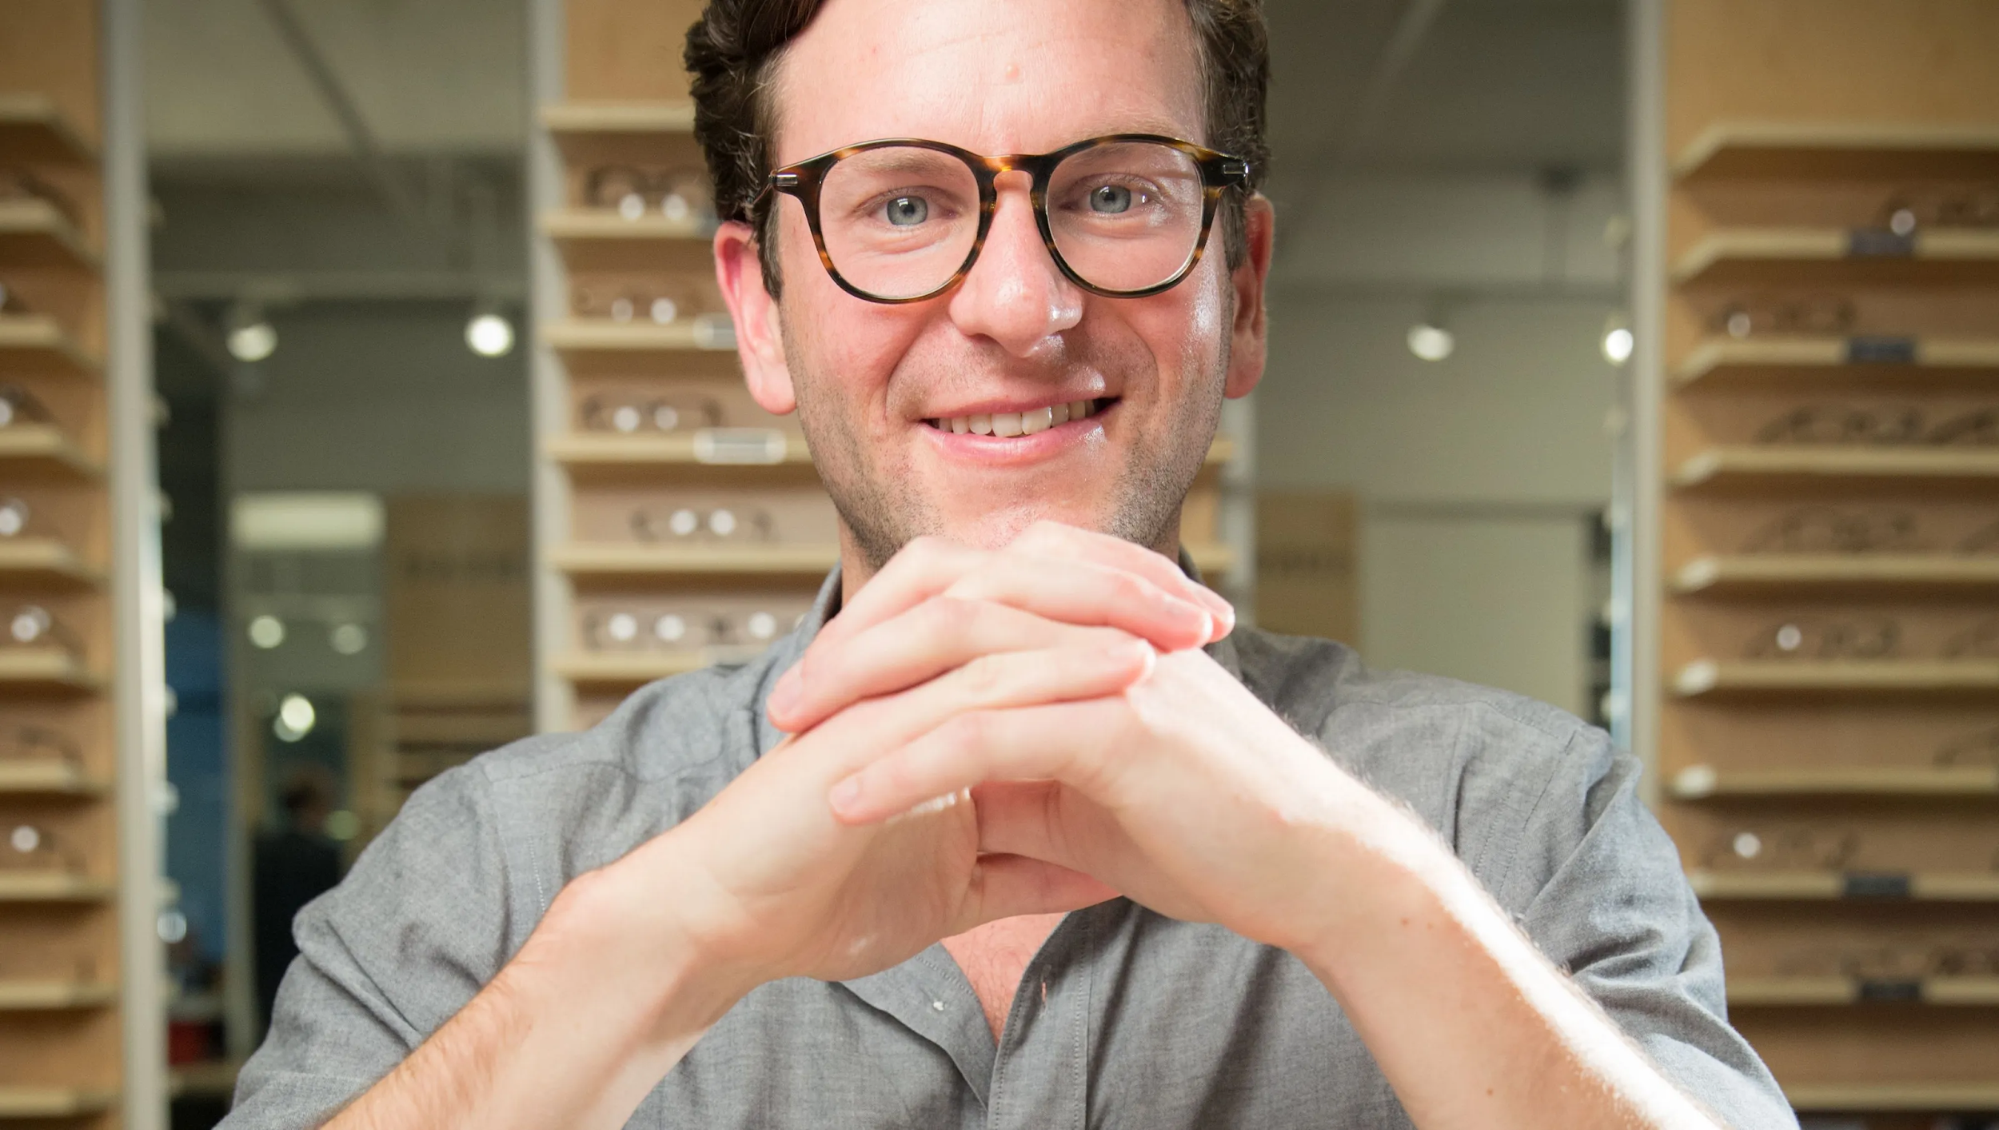 Dave Gilboa was one of four founders behind Warby Parker's launch in 2010